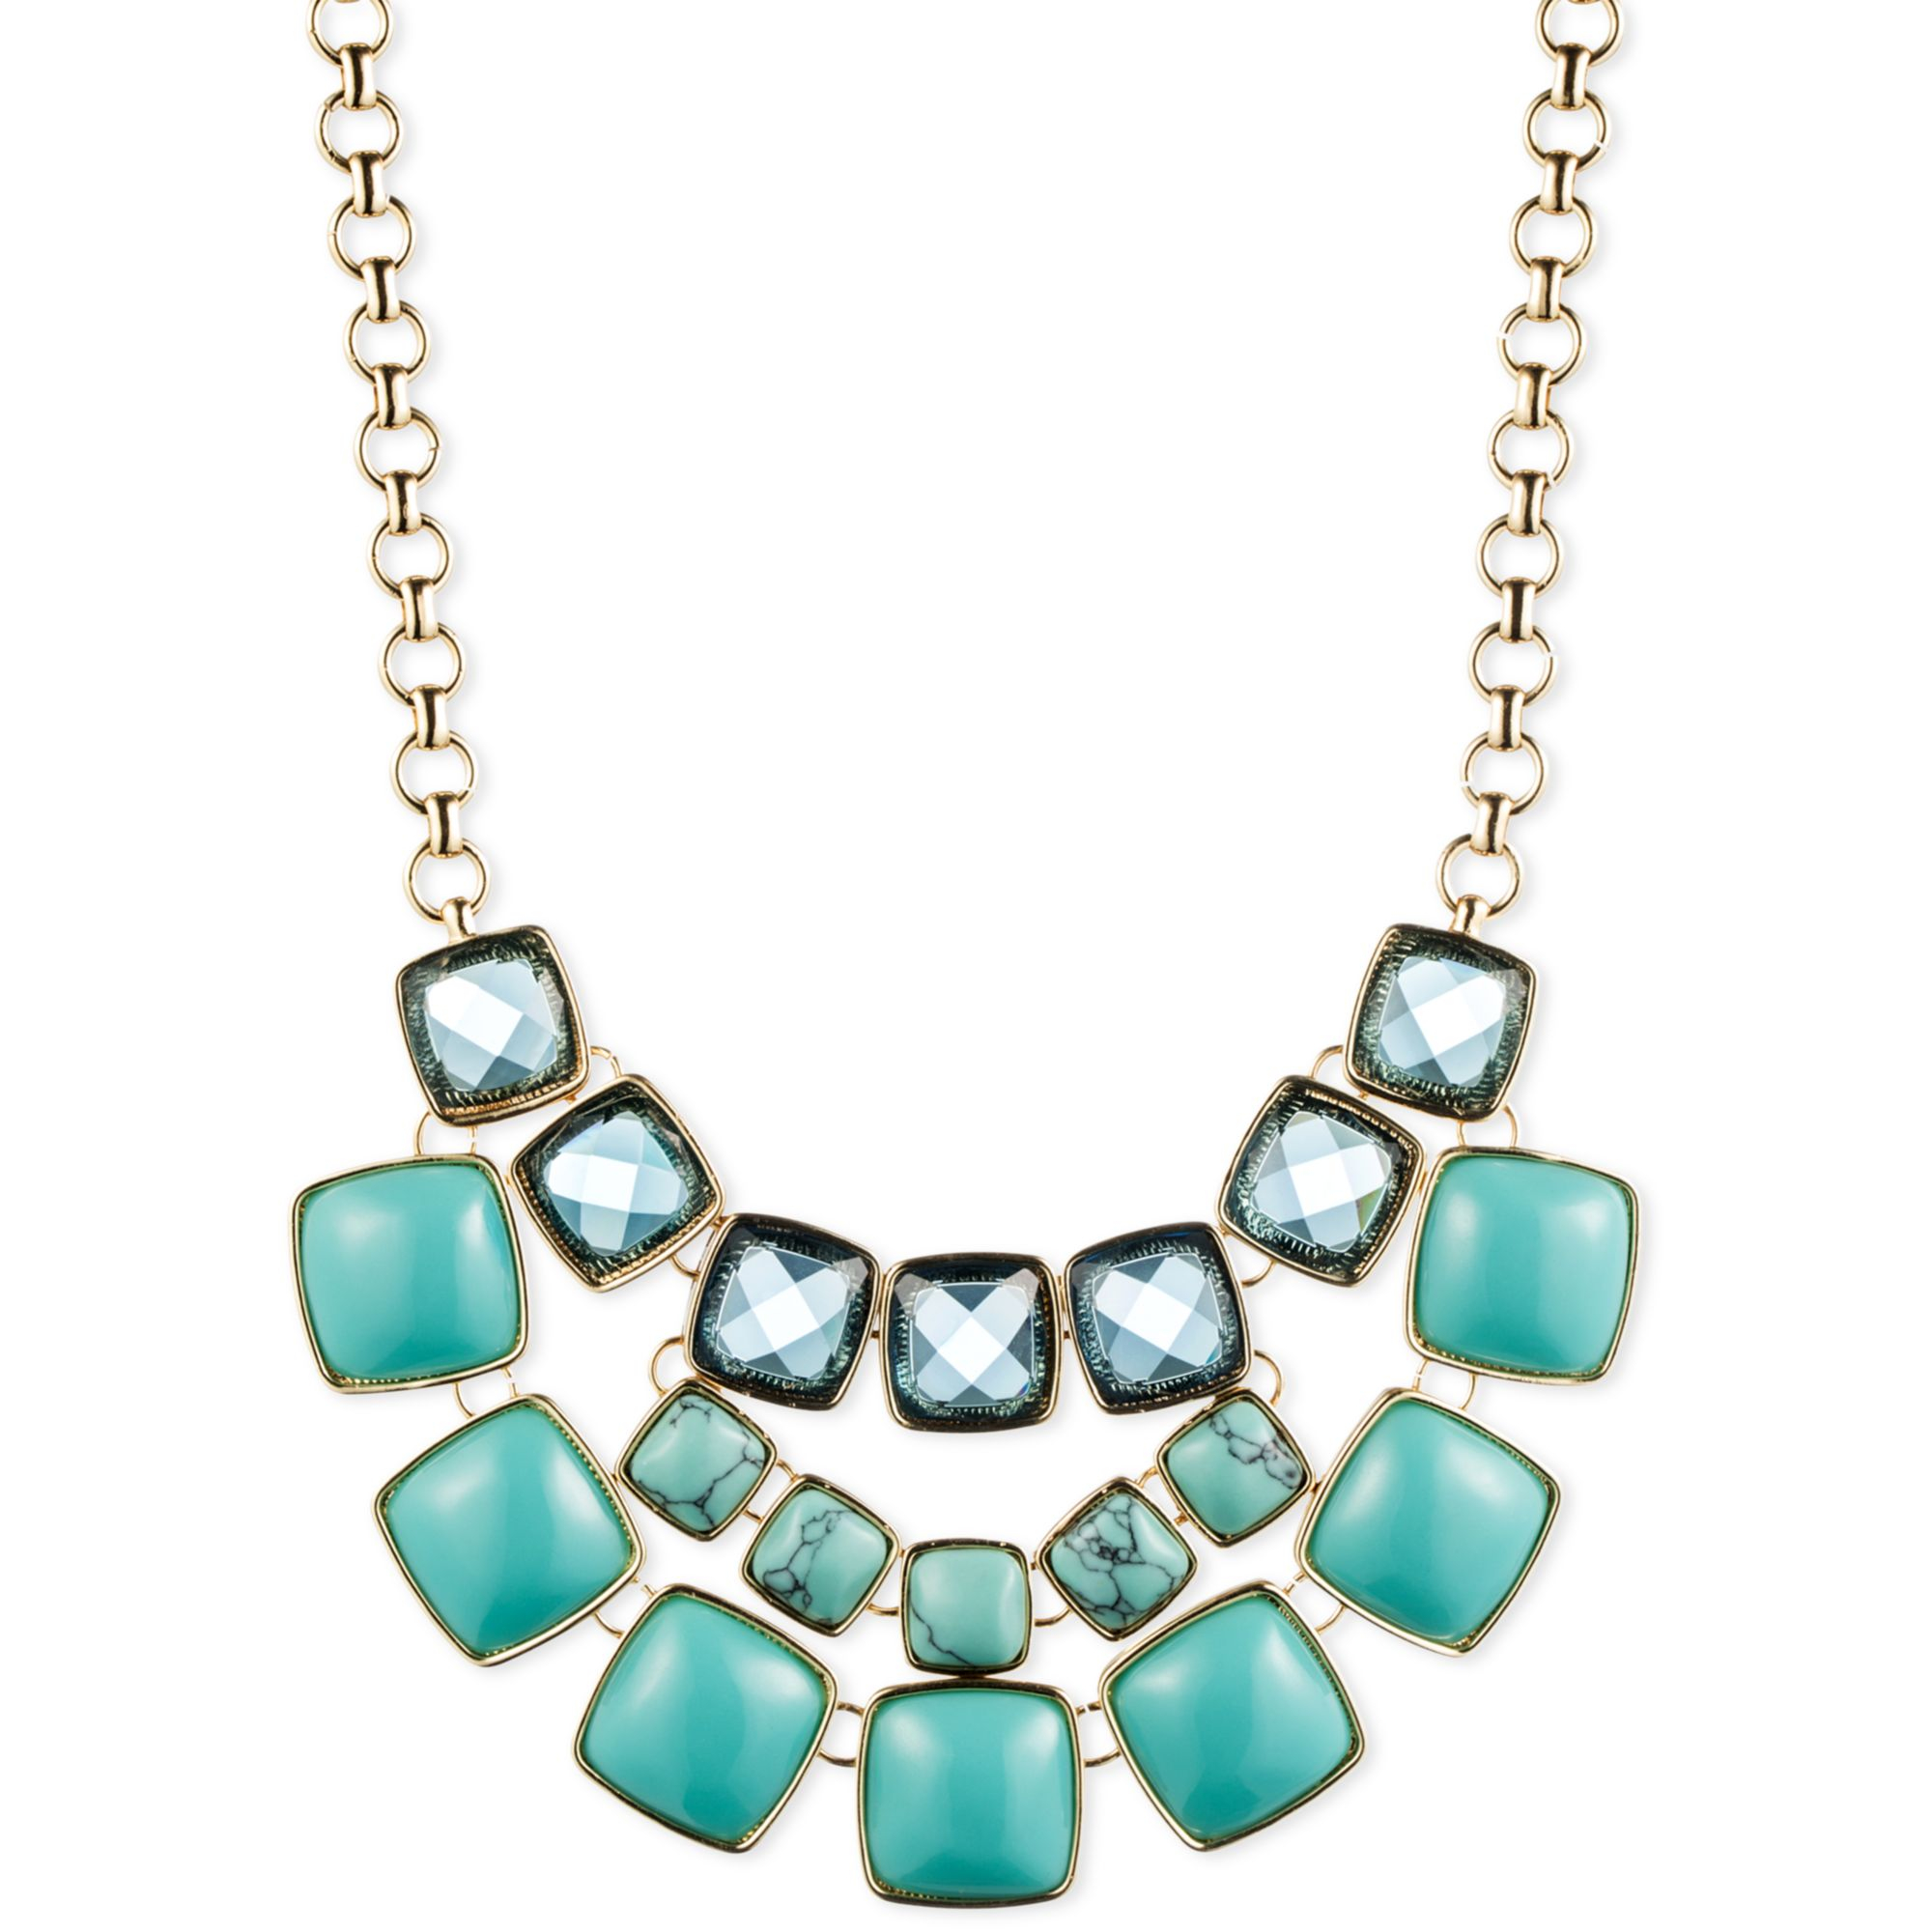 Anne Klein Goldtone Turquoise and Aqua Bead Threerow Frontal Necklace ...